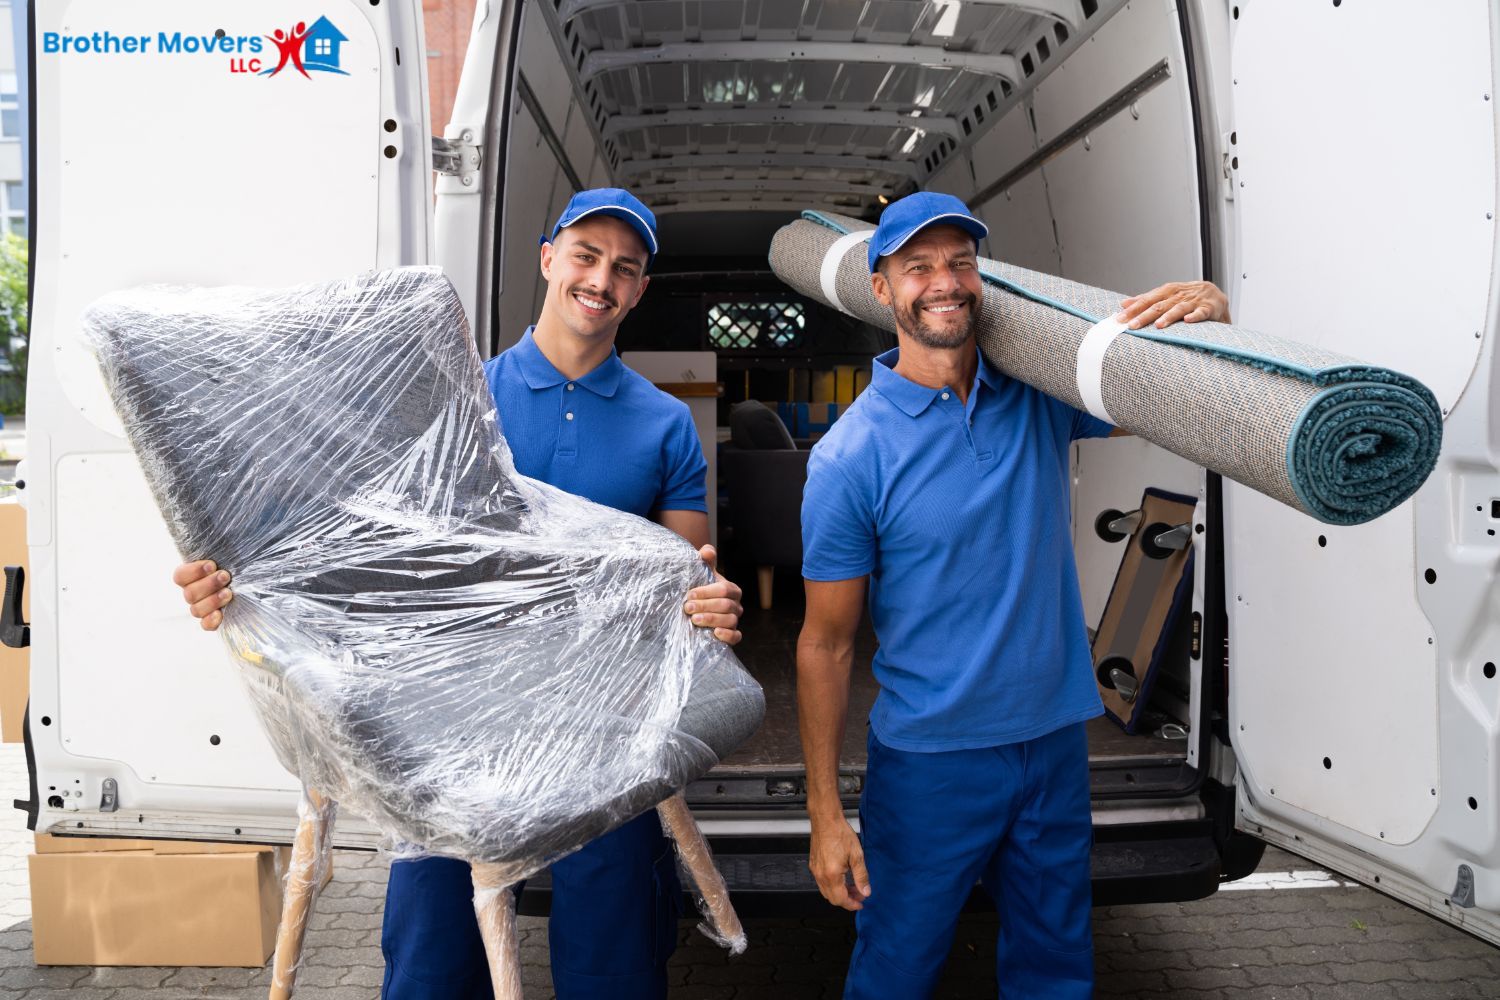 Long distance Moving company in San Diego